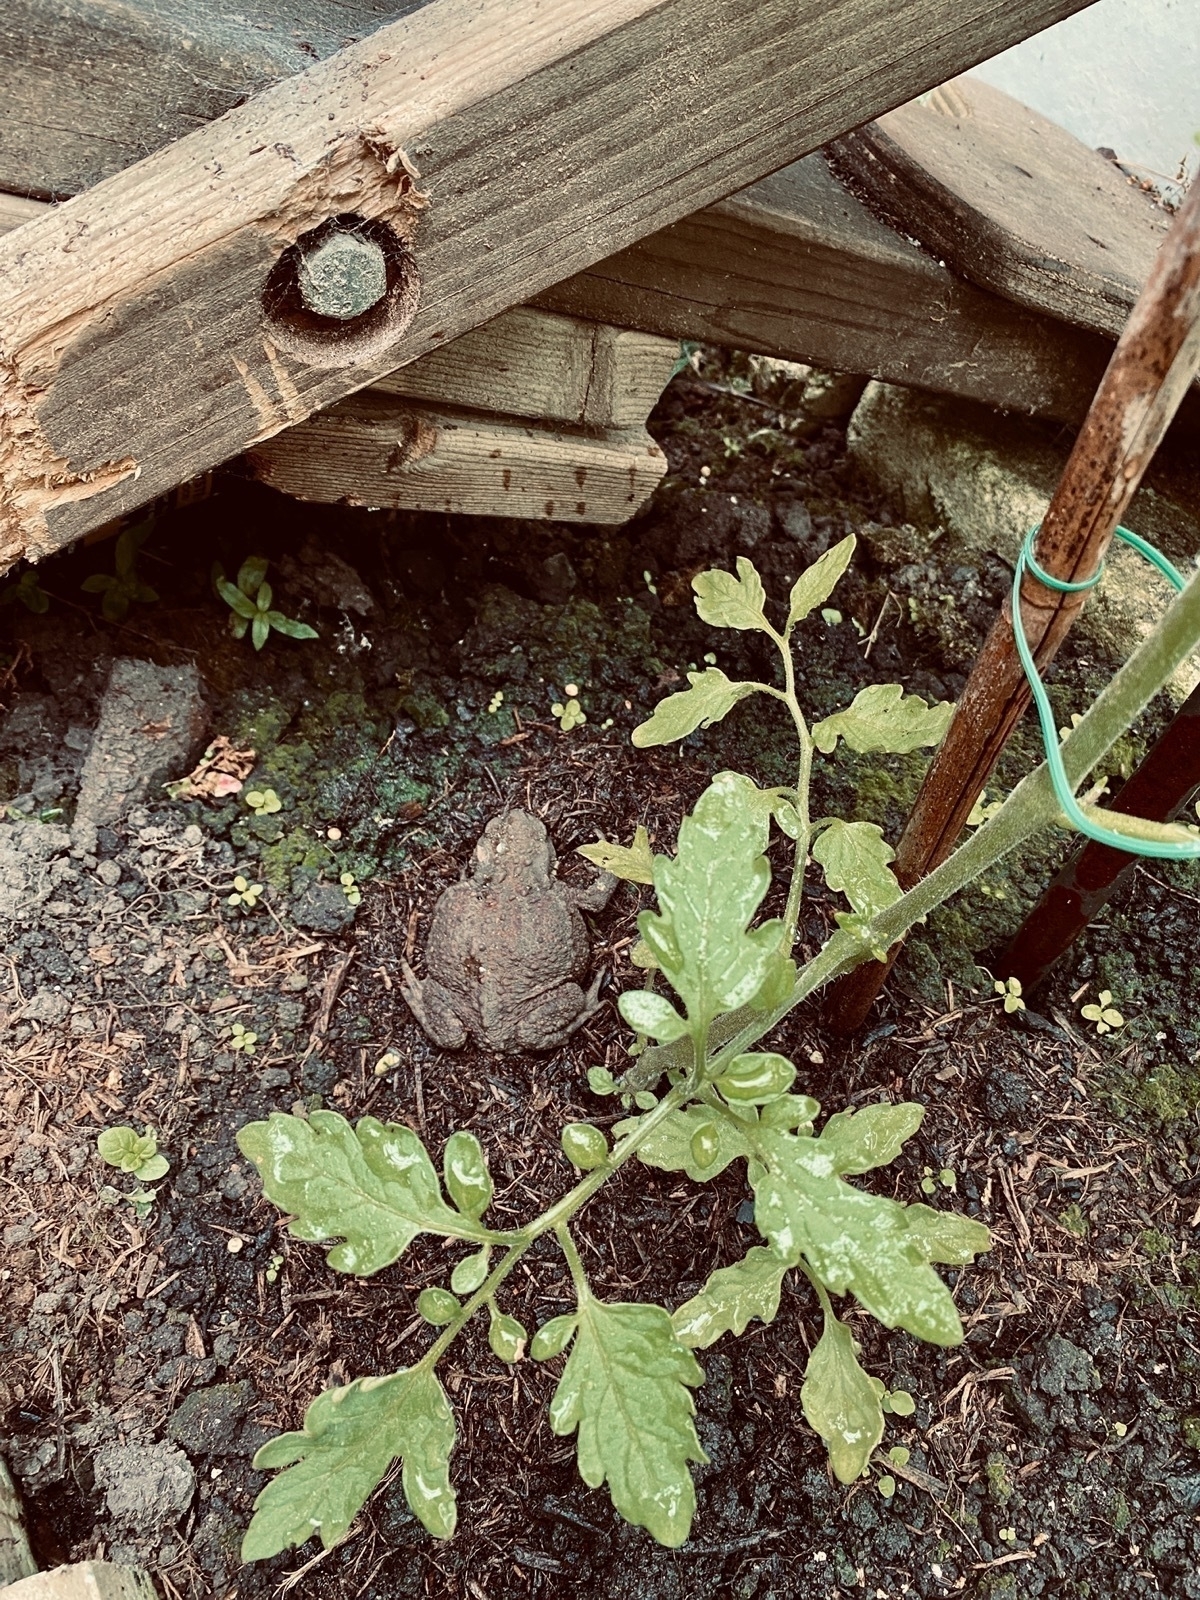 Toad on soil under the leaves of a tomato plant